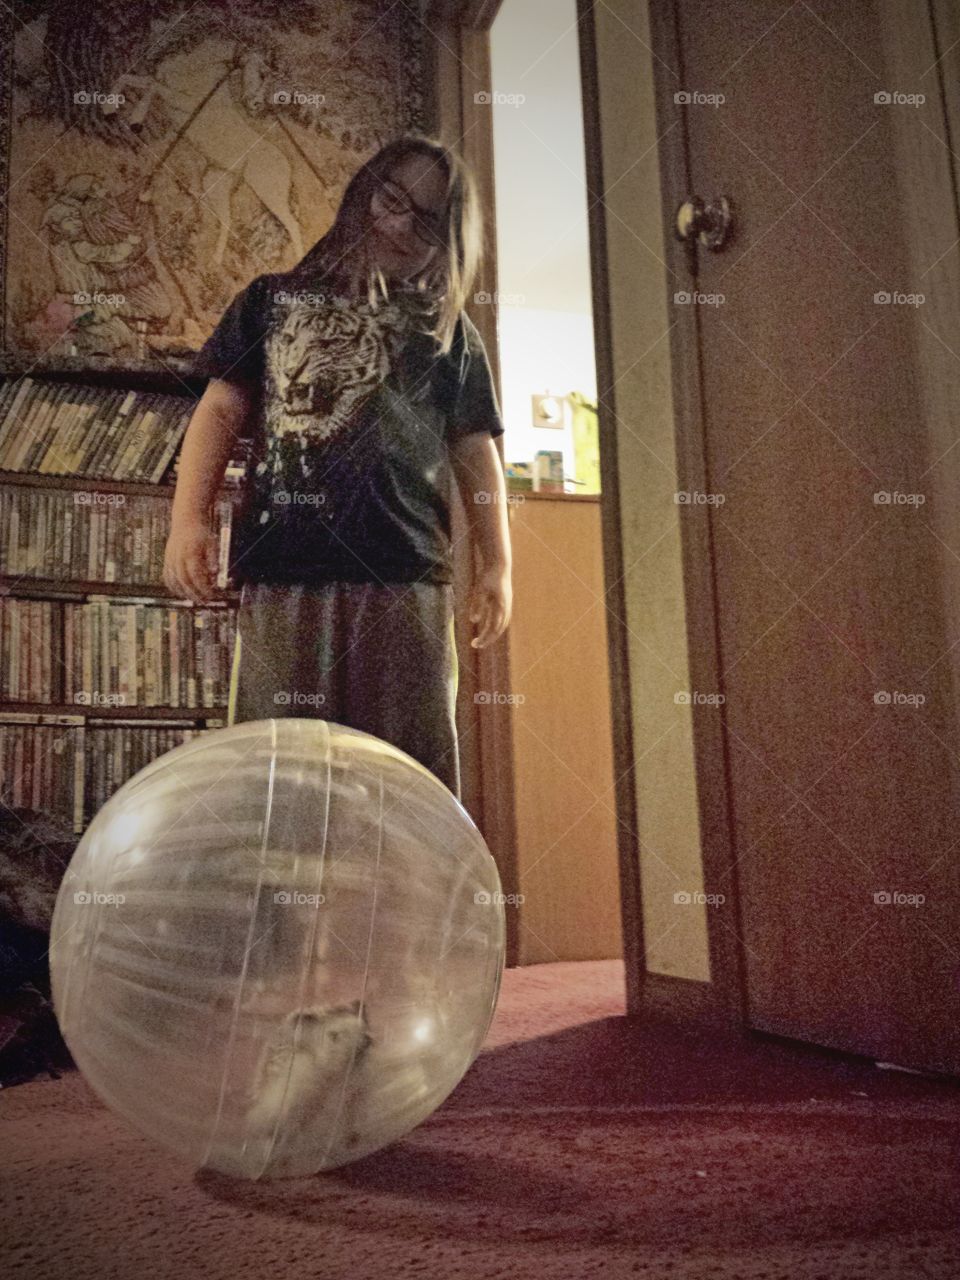 Teenager girl with toy transparent ball standing at home